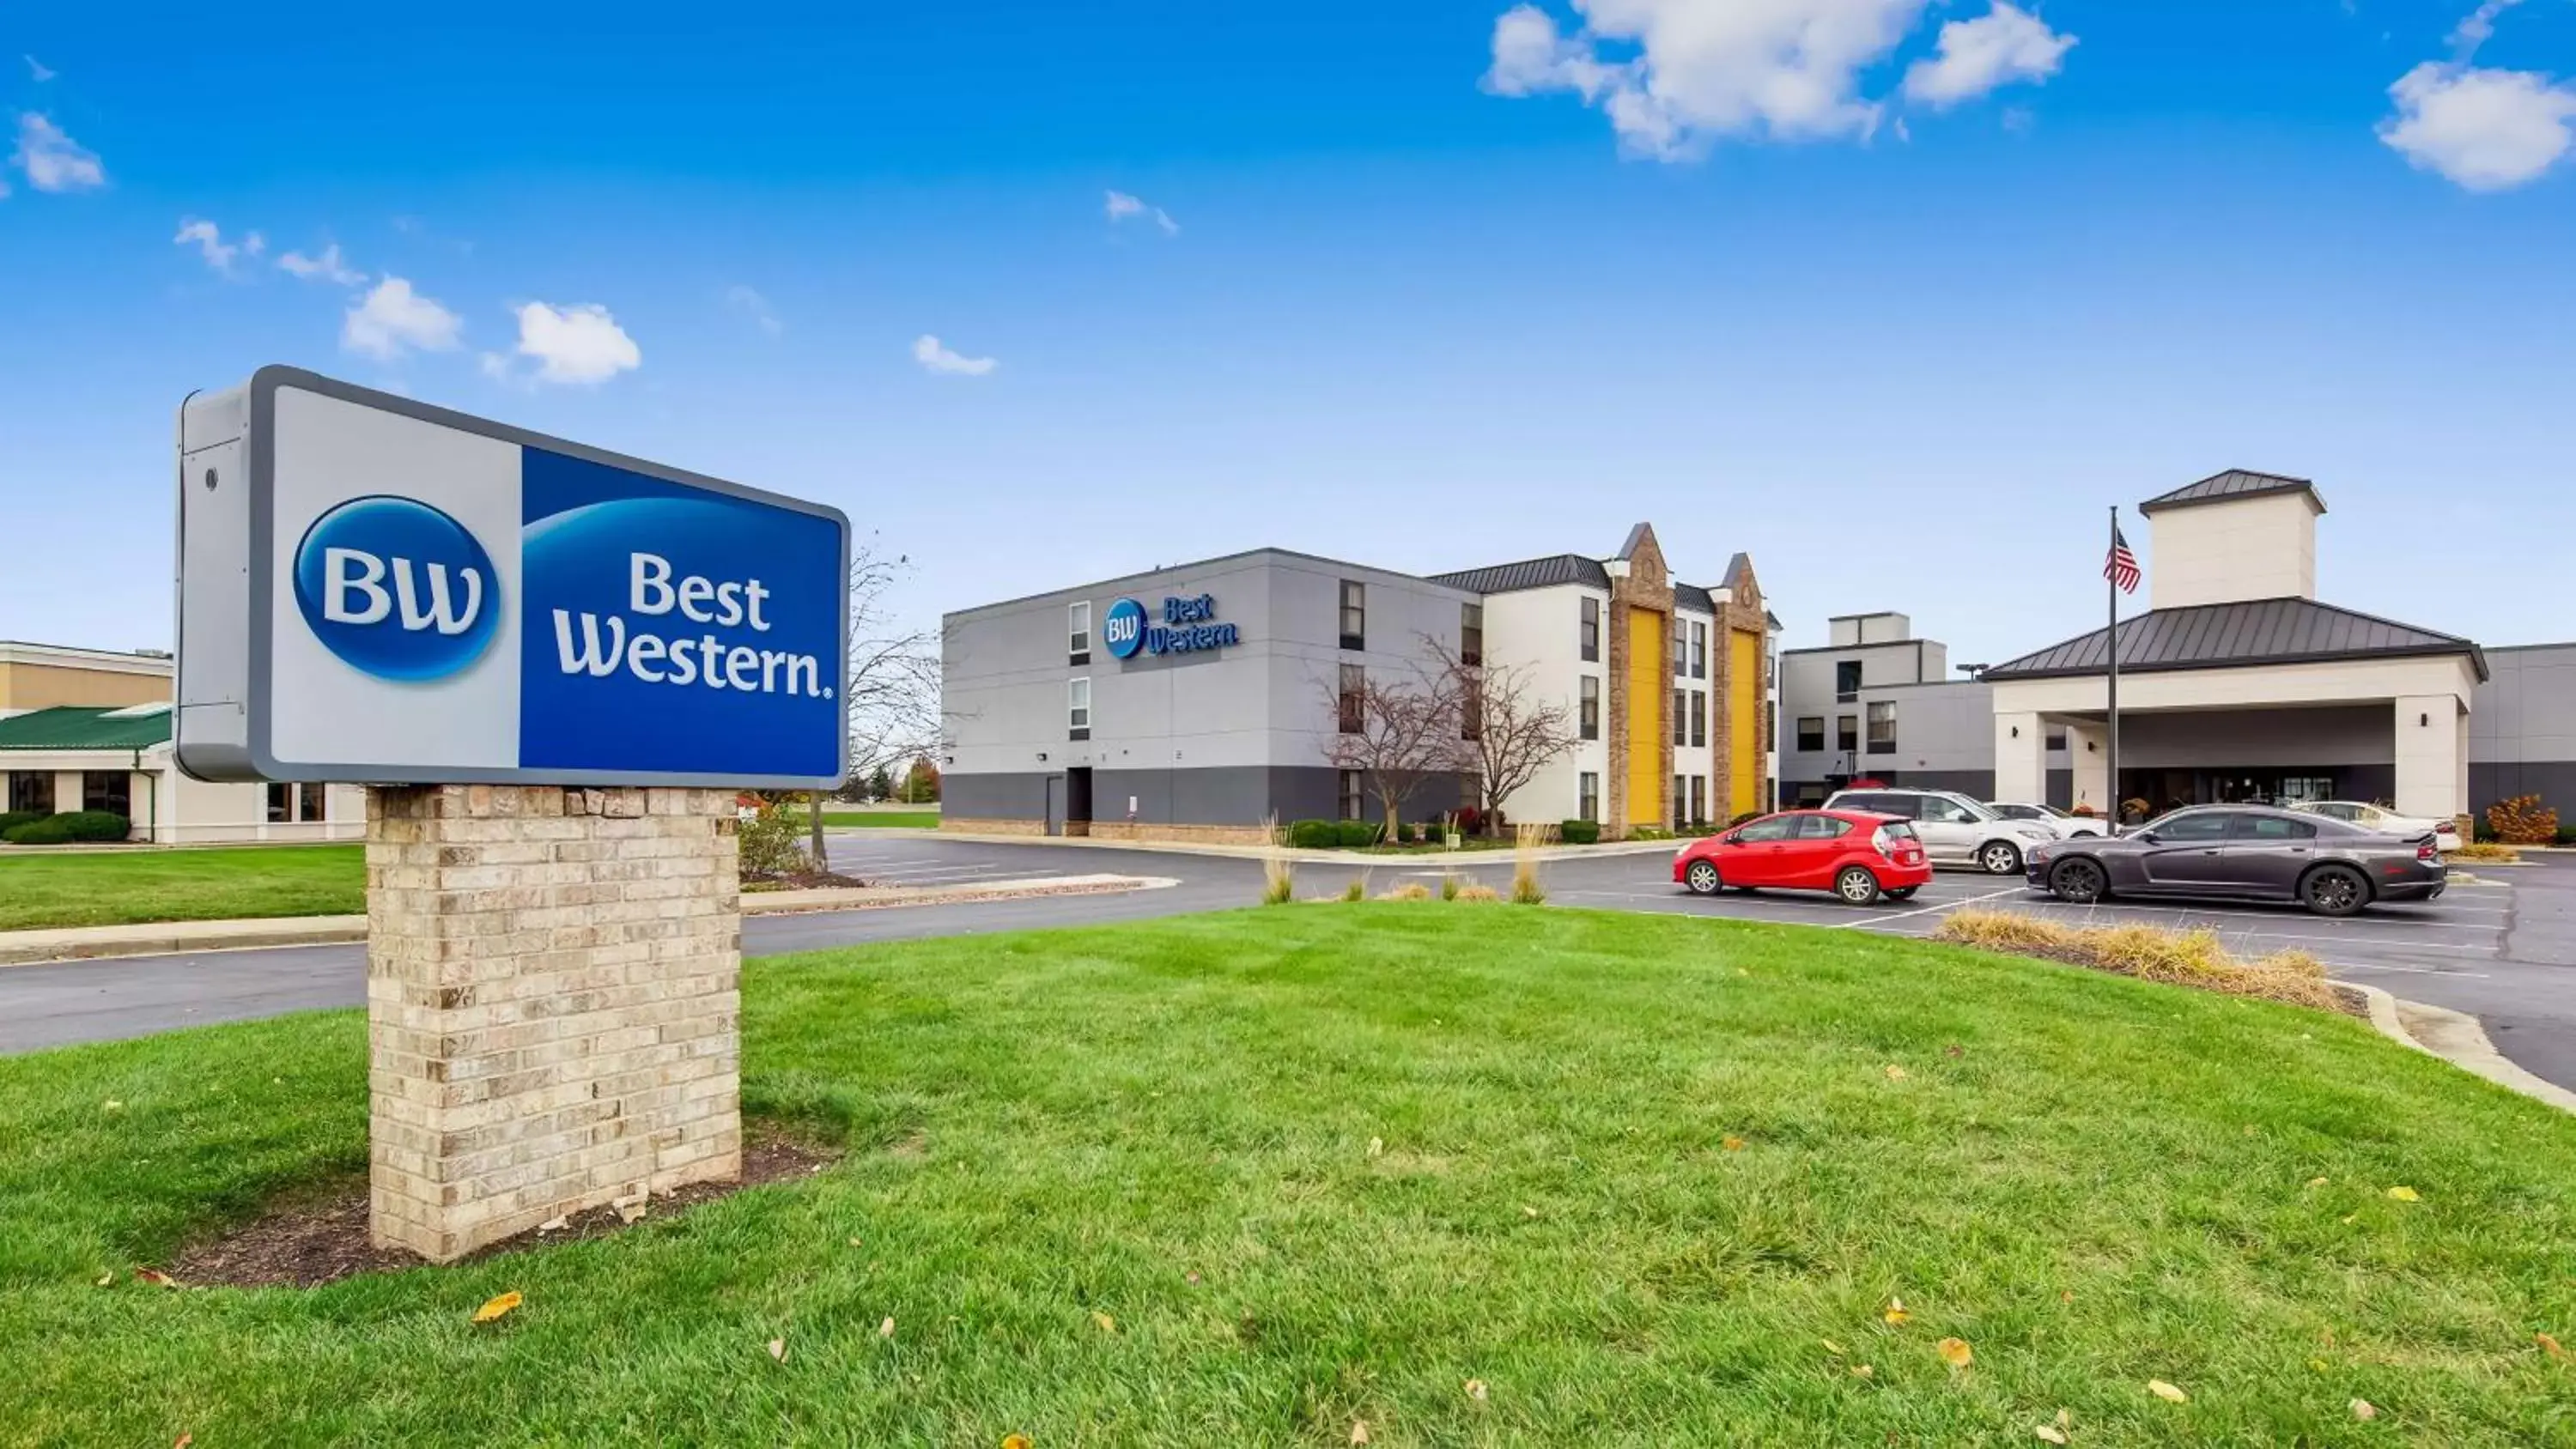 Property building in Best Western Fishers Indianapolis